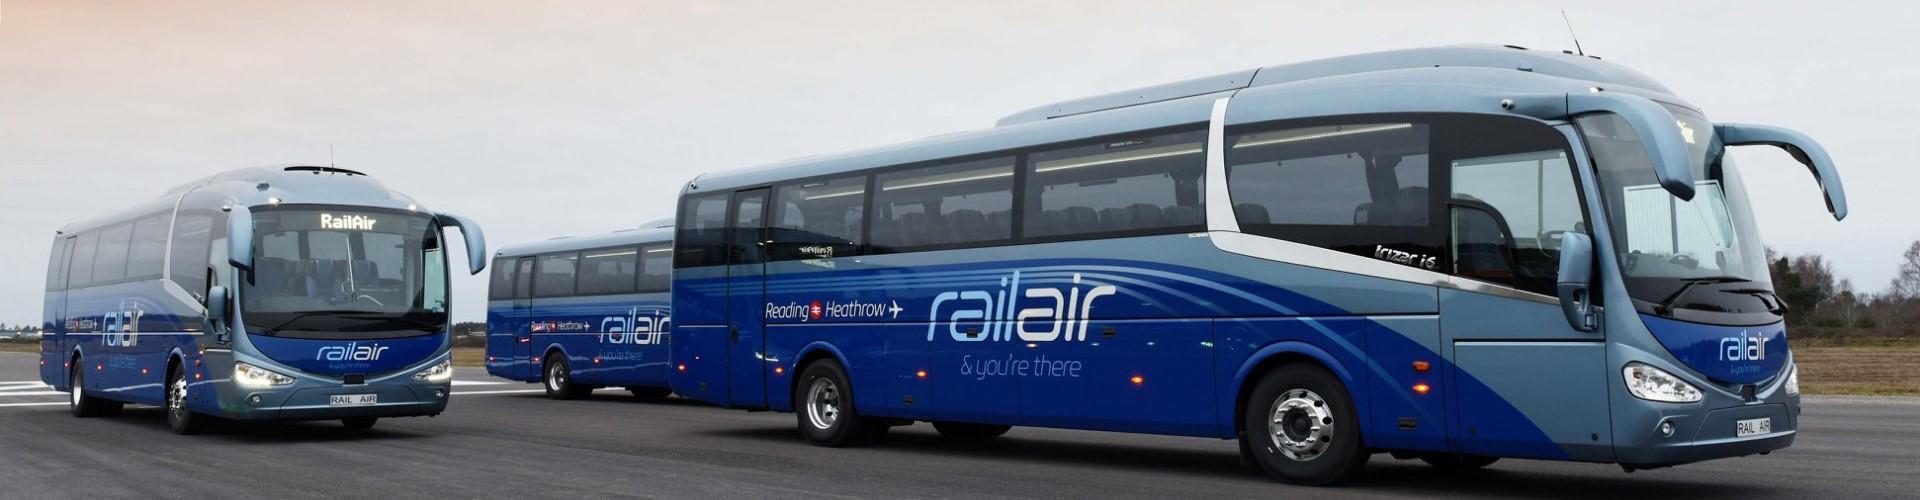 Three RailAir coaches ready to depart from Reading Station to Heathrow Airport